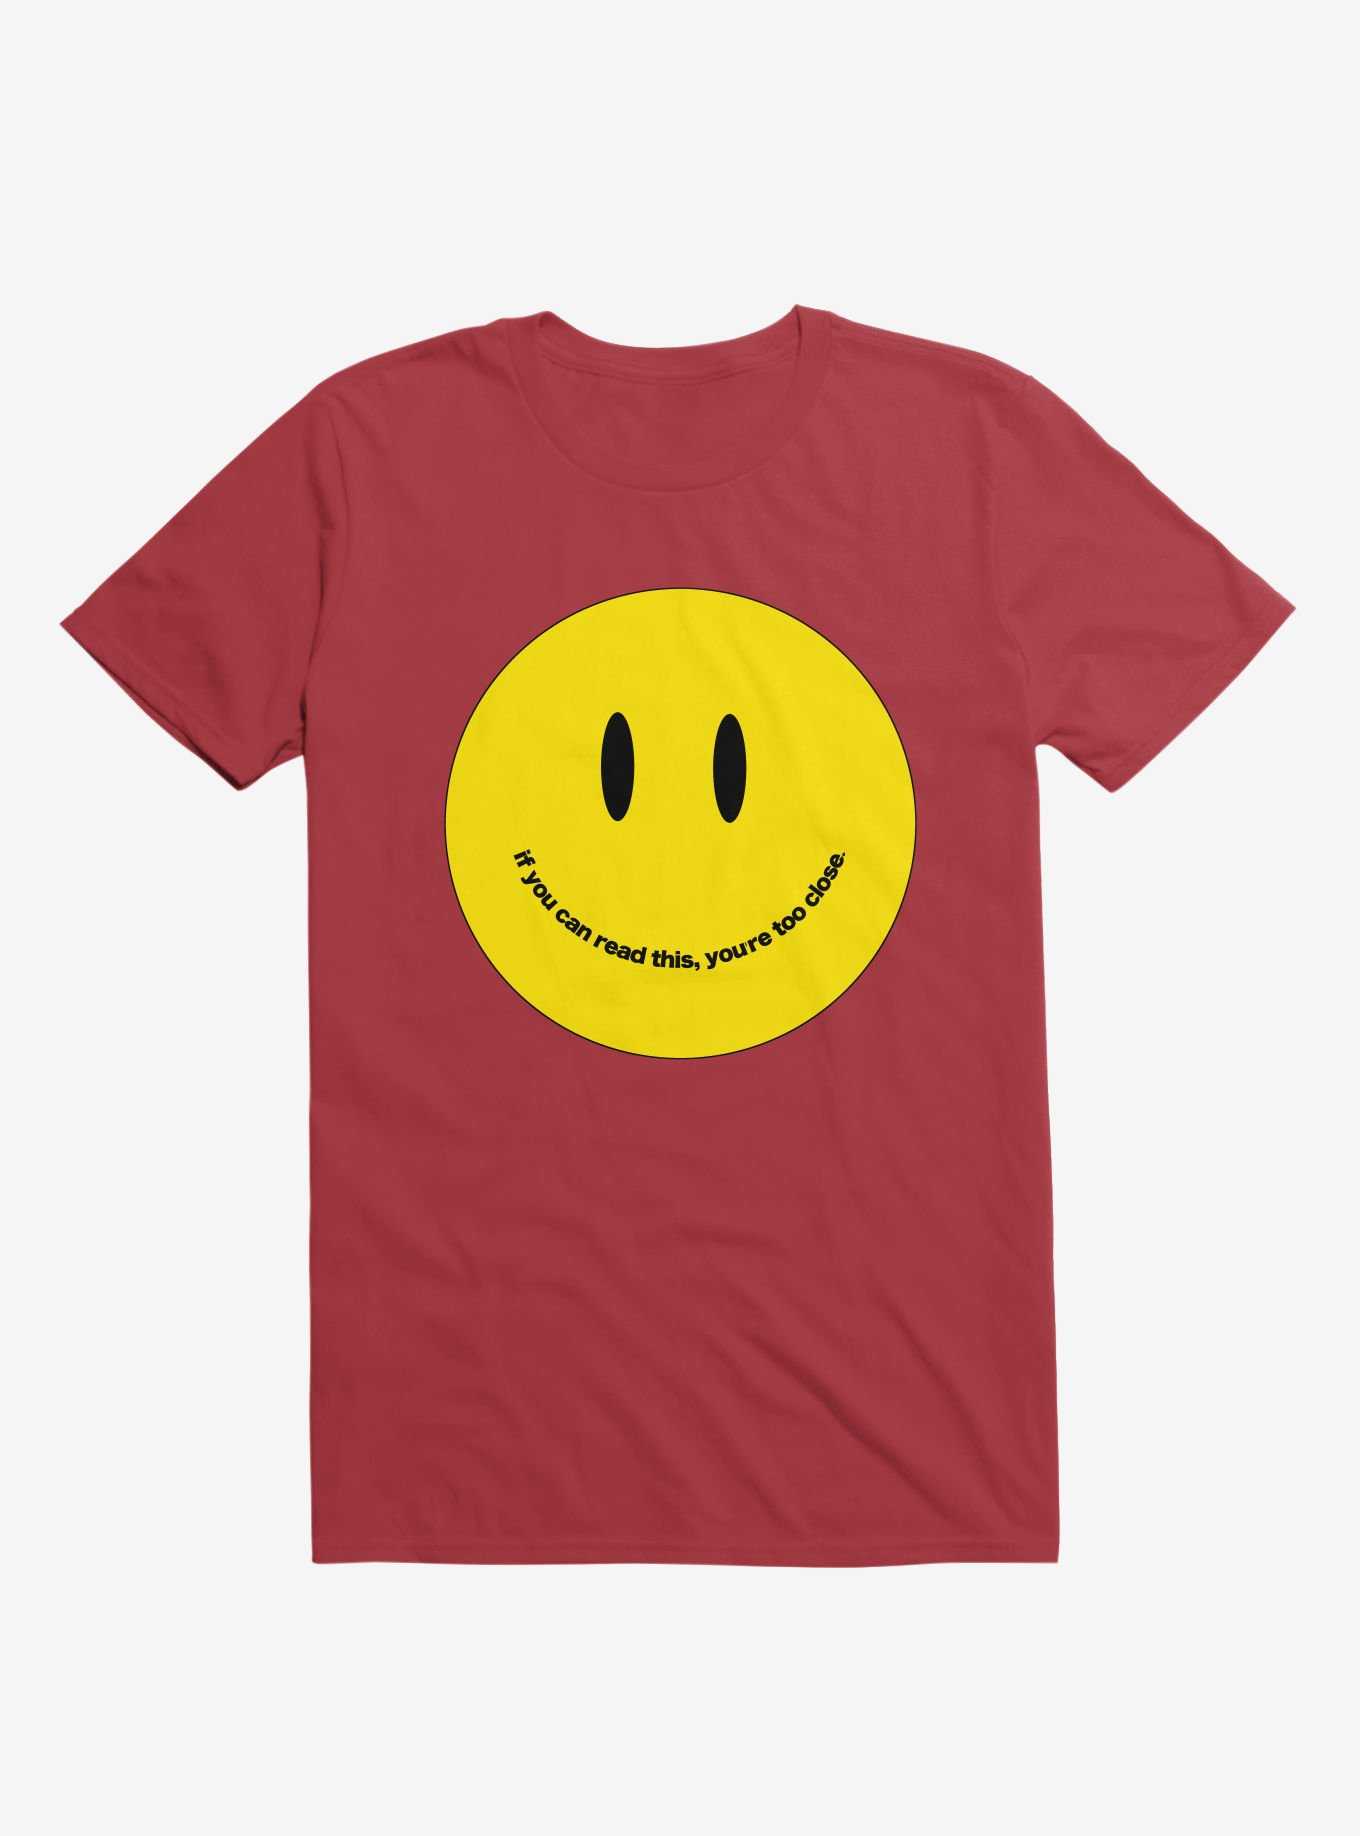 You're Too Close Smile Face Red T-Shirt, , hi-res